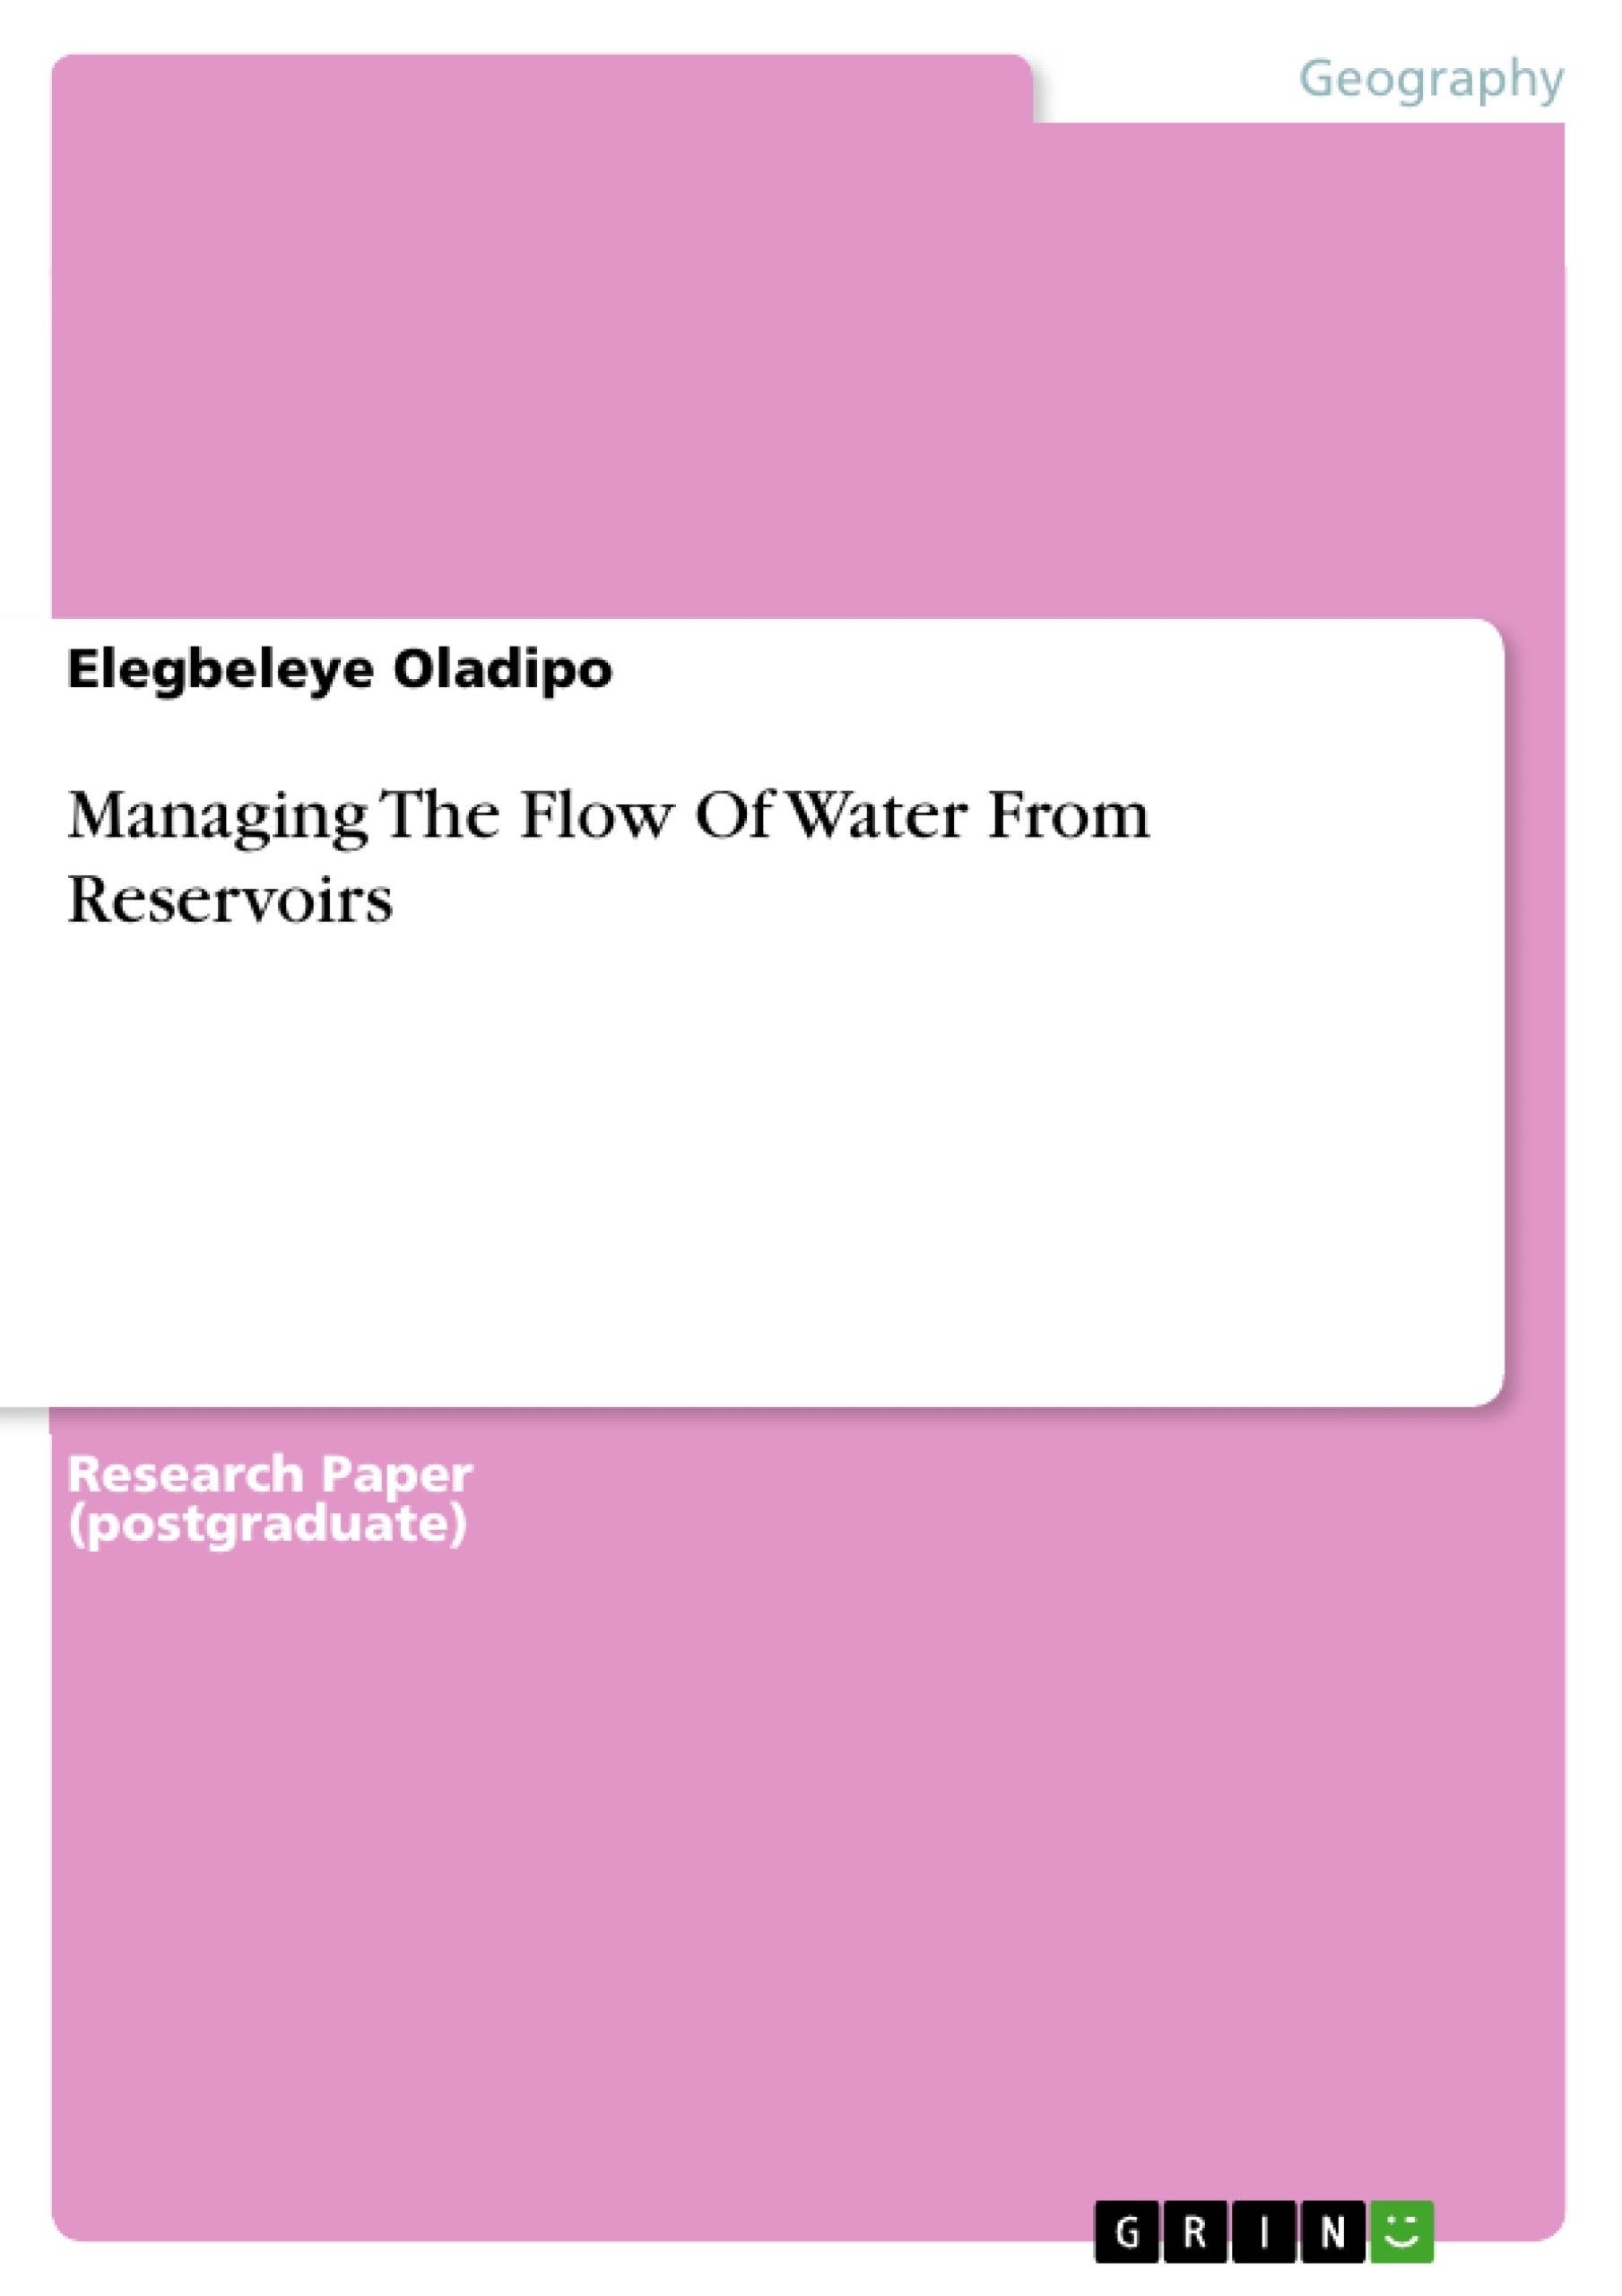 Titre: Managing The Flow Of Water From Reservoirs